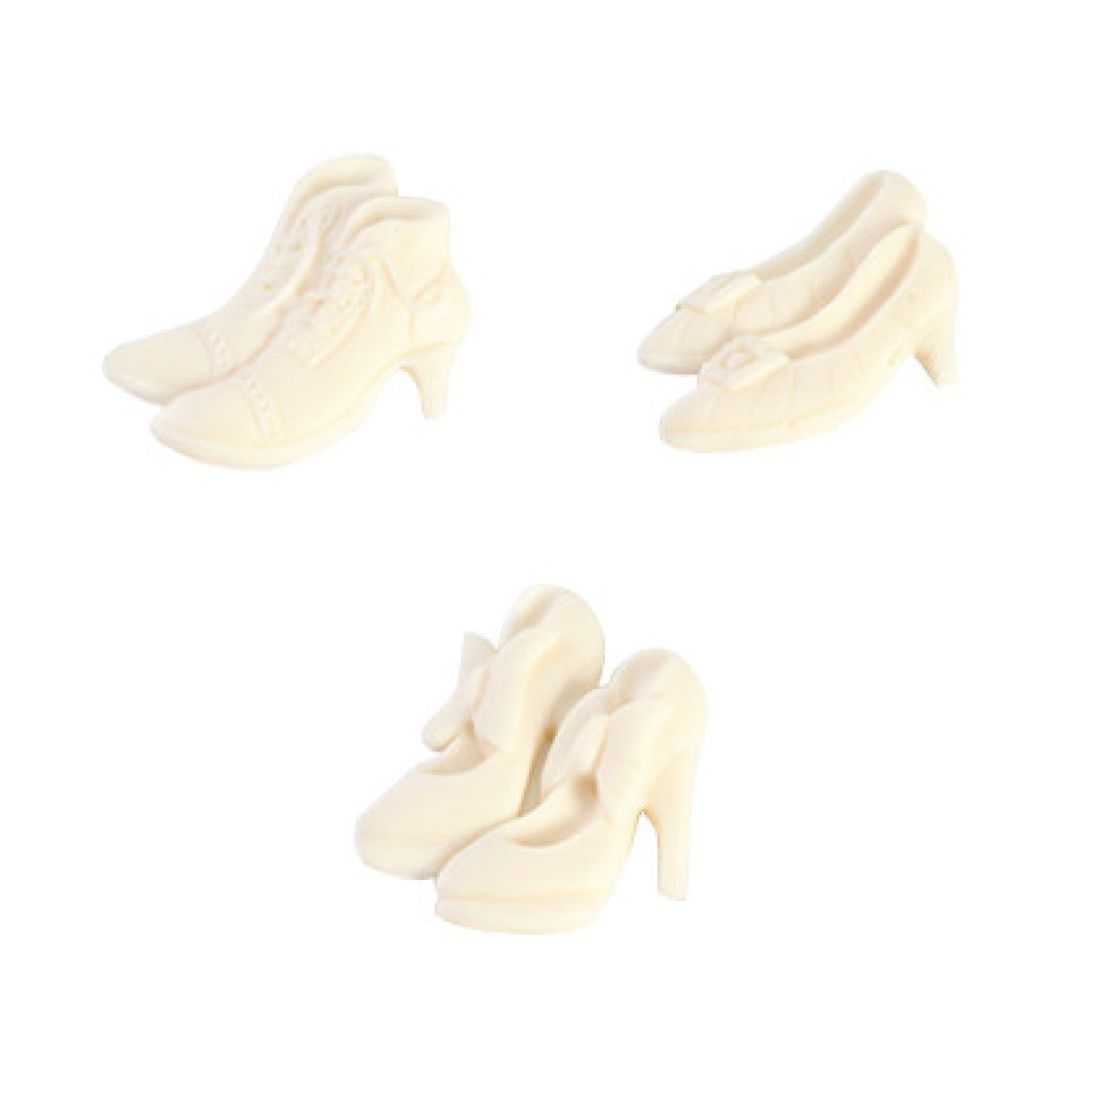 Squires Kitchen Sugarcraft Great Impressions Silicone Mould Shoes